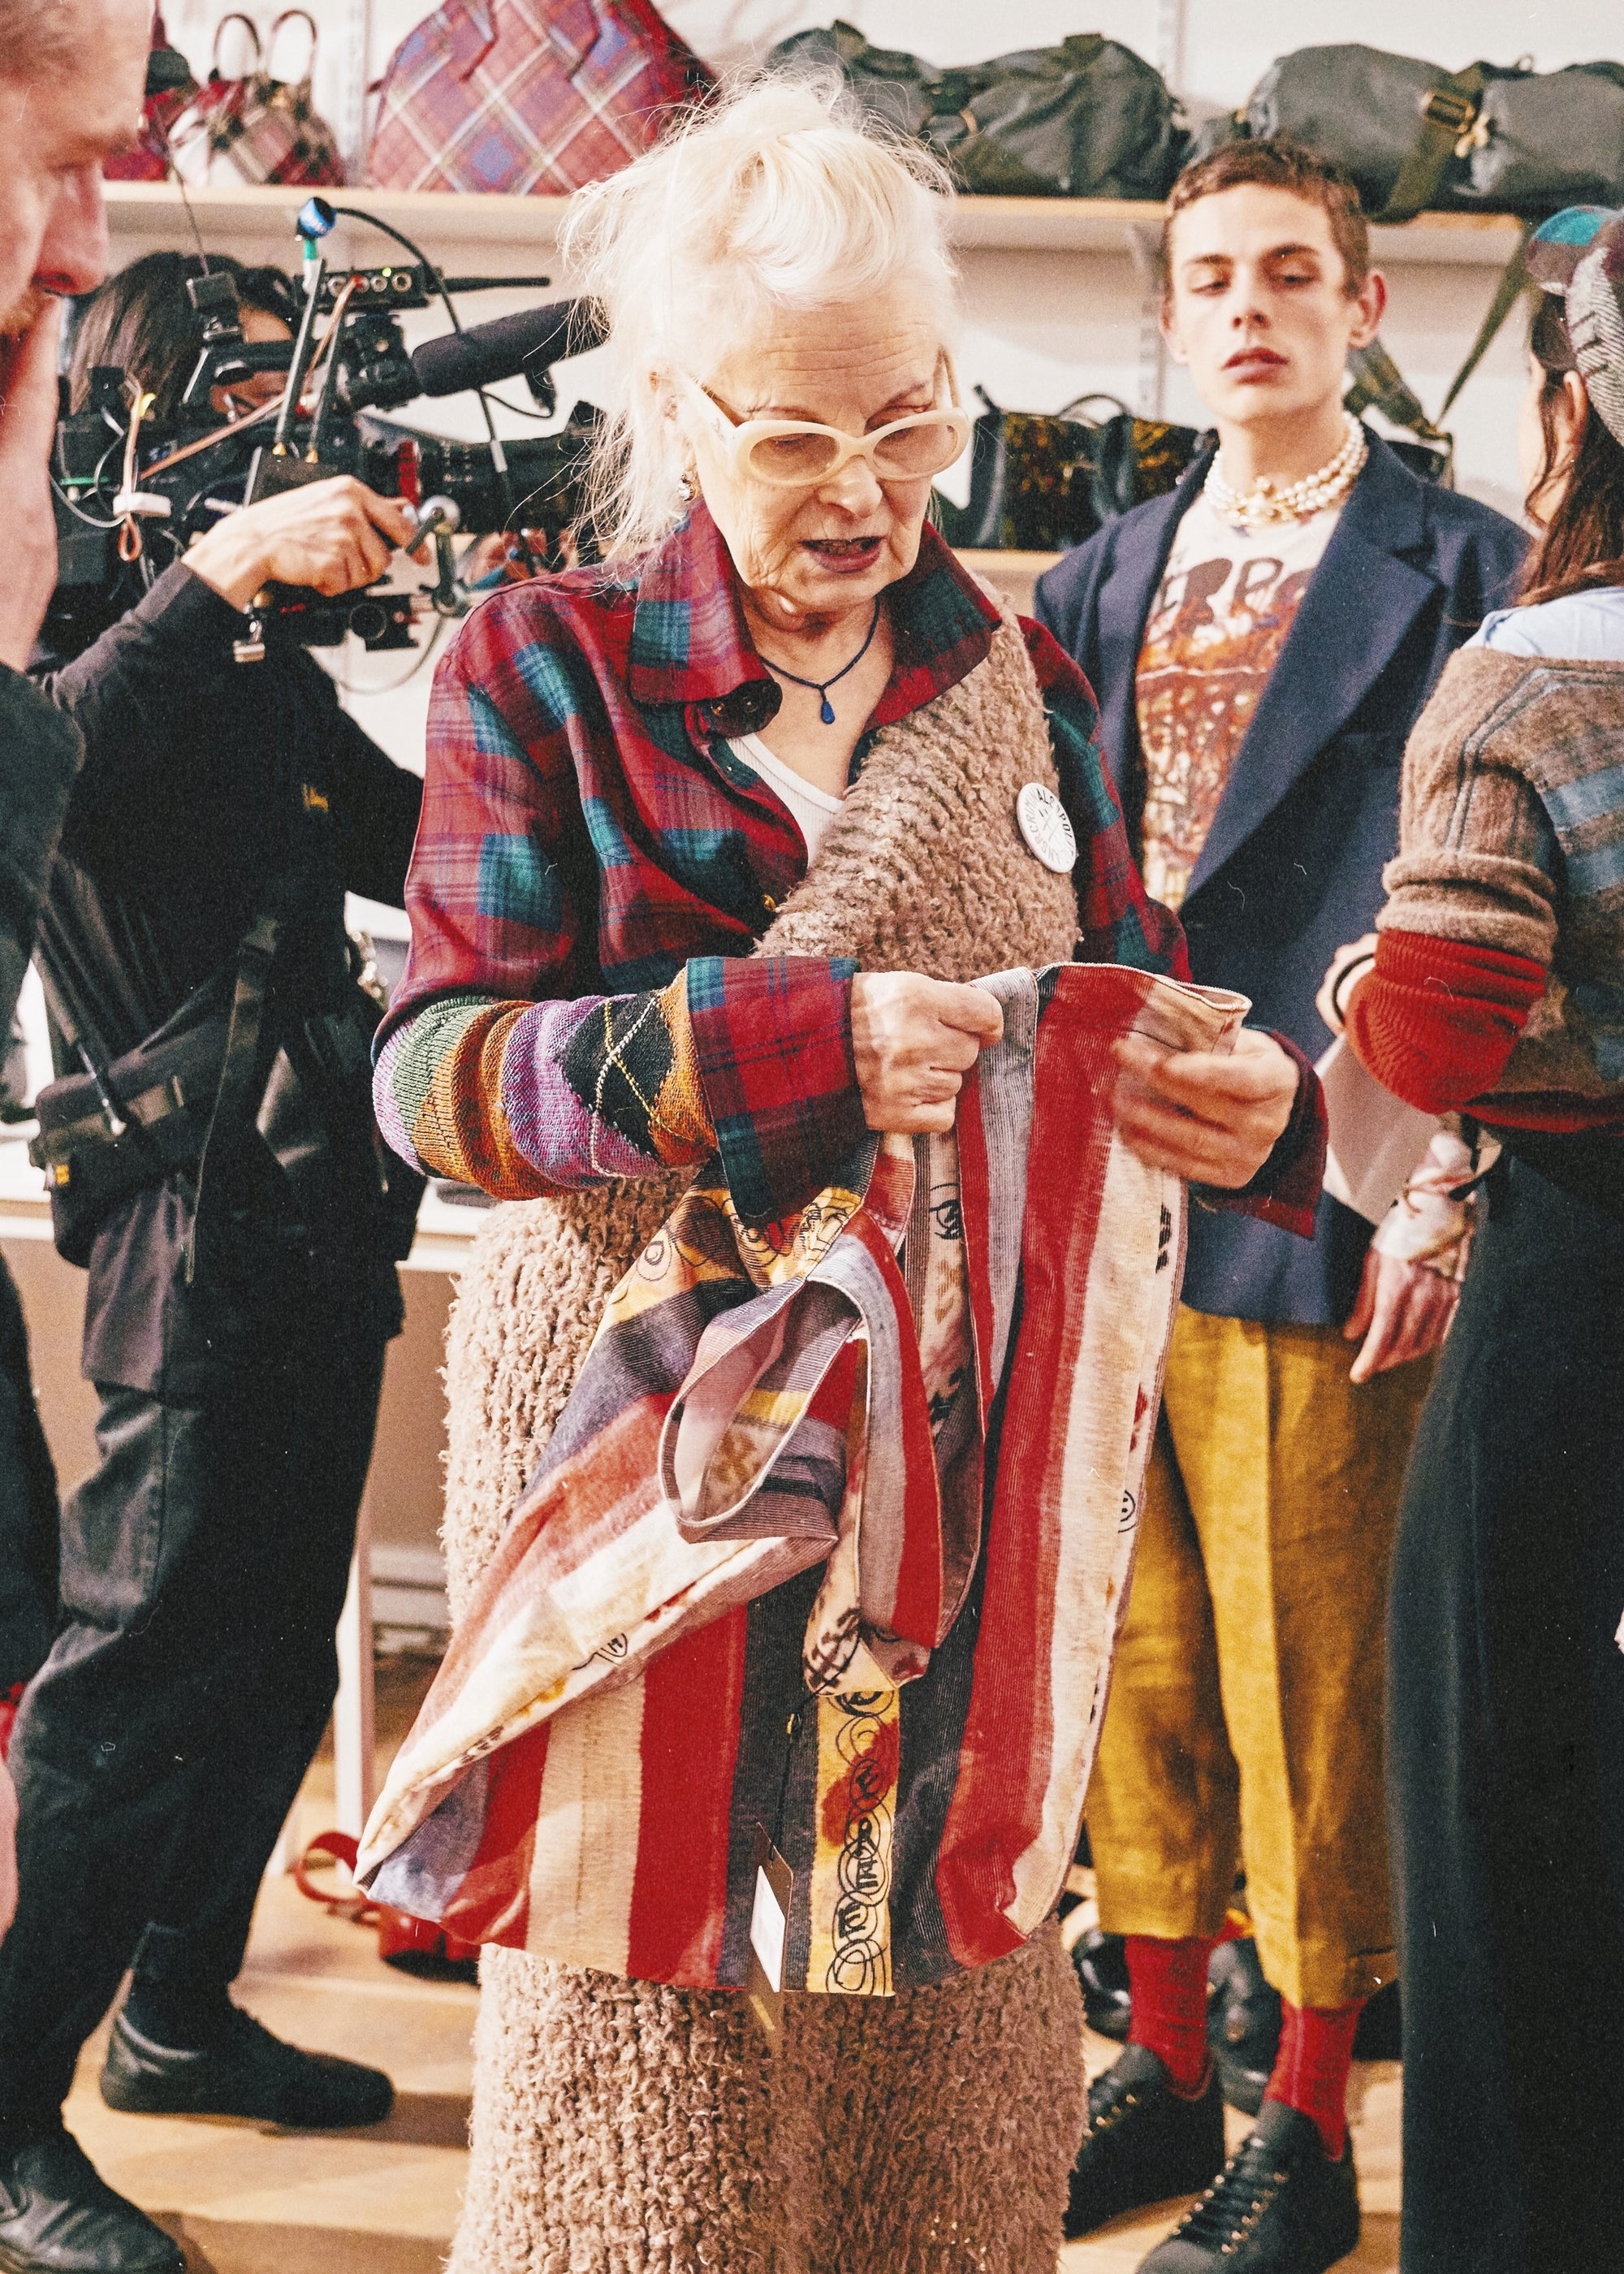 ★ HAPPY 80TH BIRTHDAY TO MY OLD BOSS VIVIENNE WESTWOOD ★